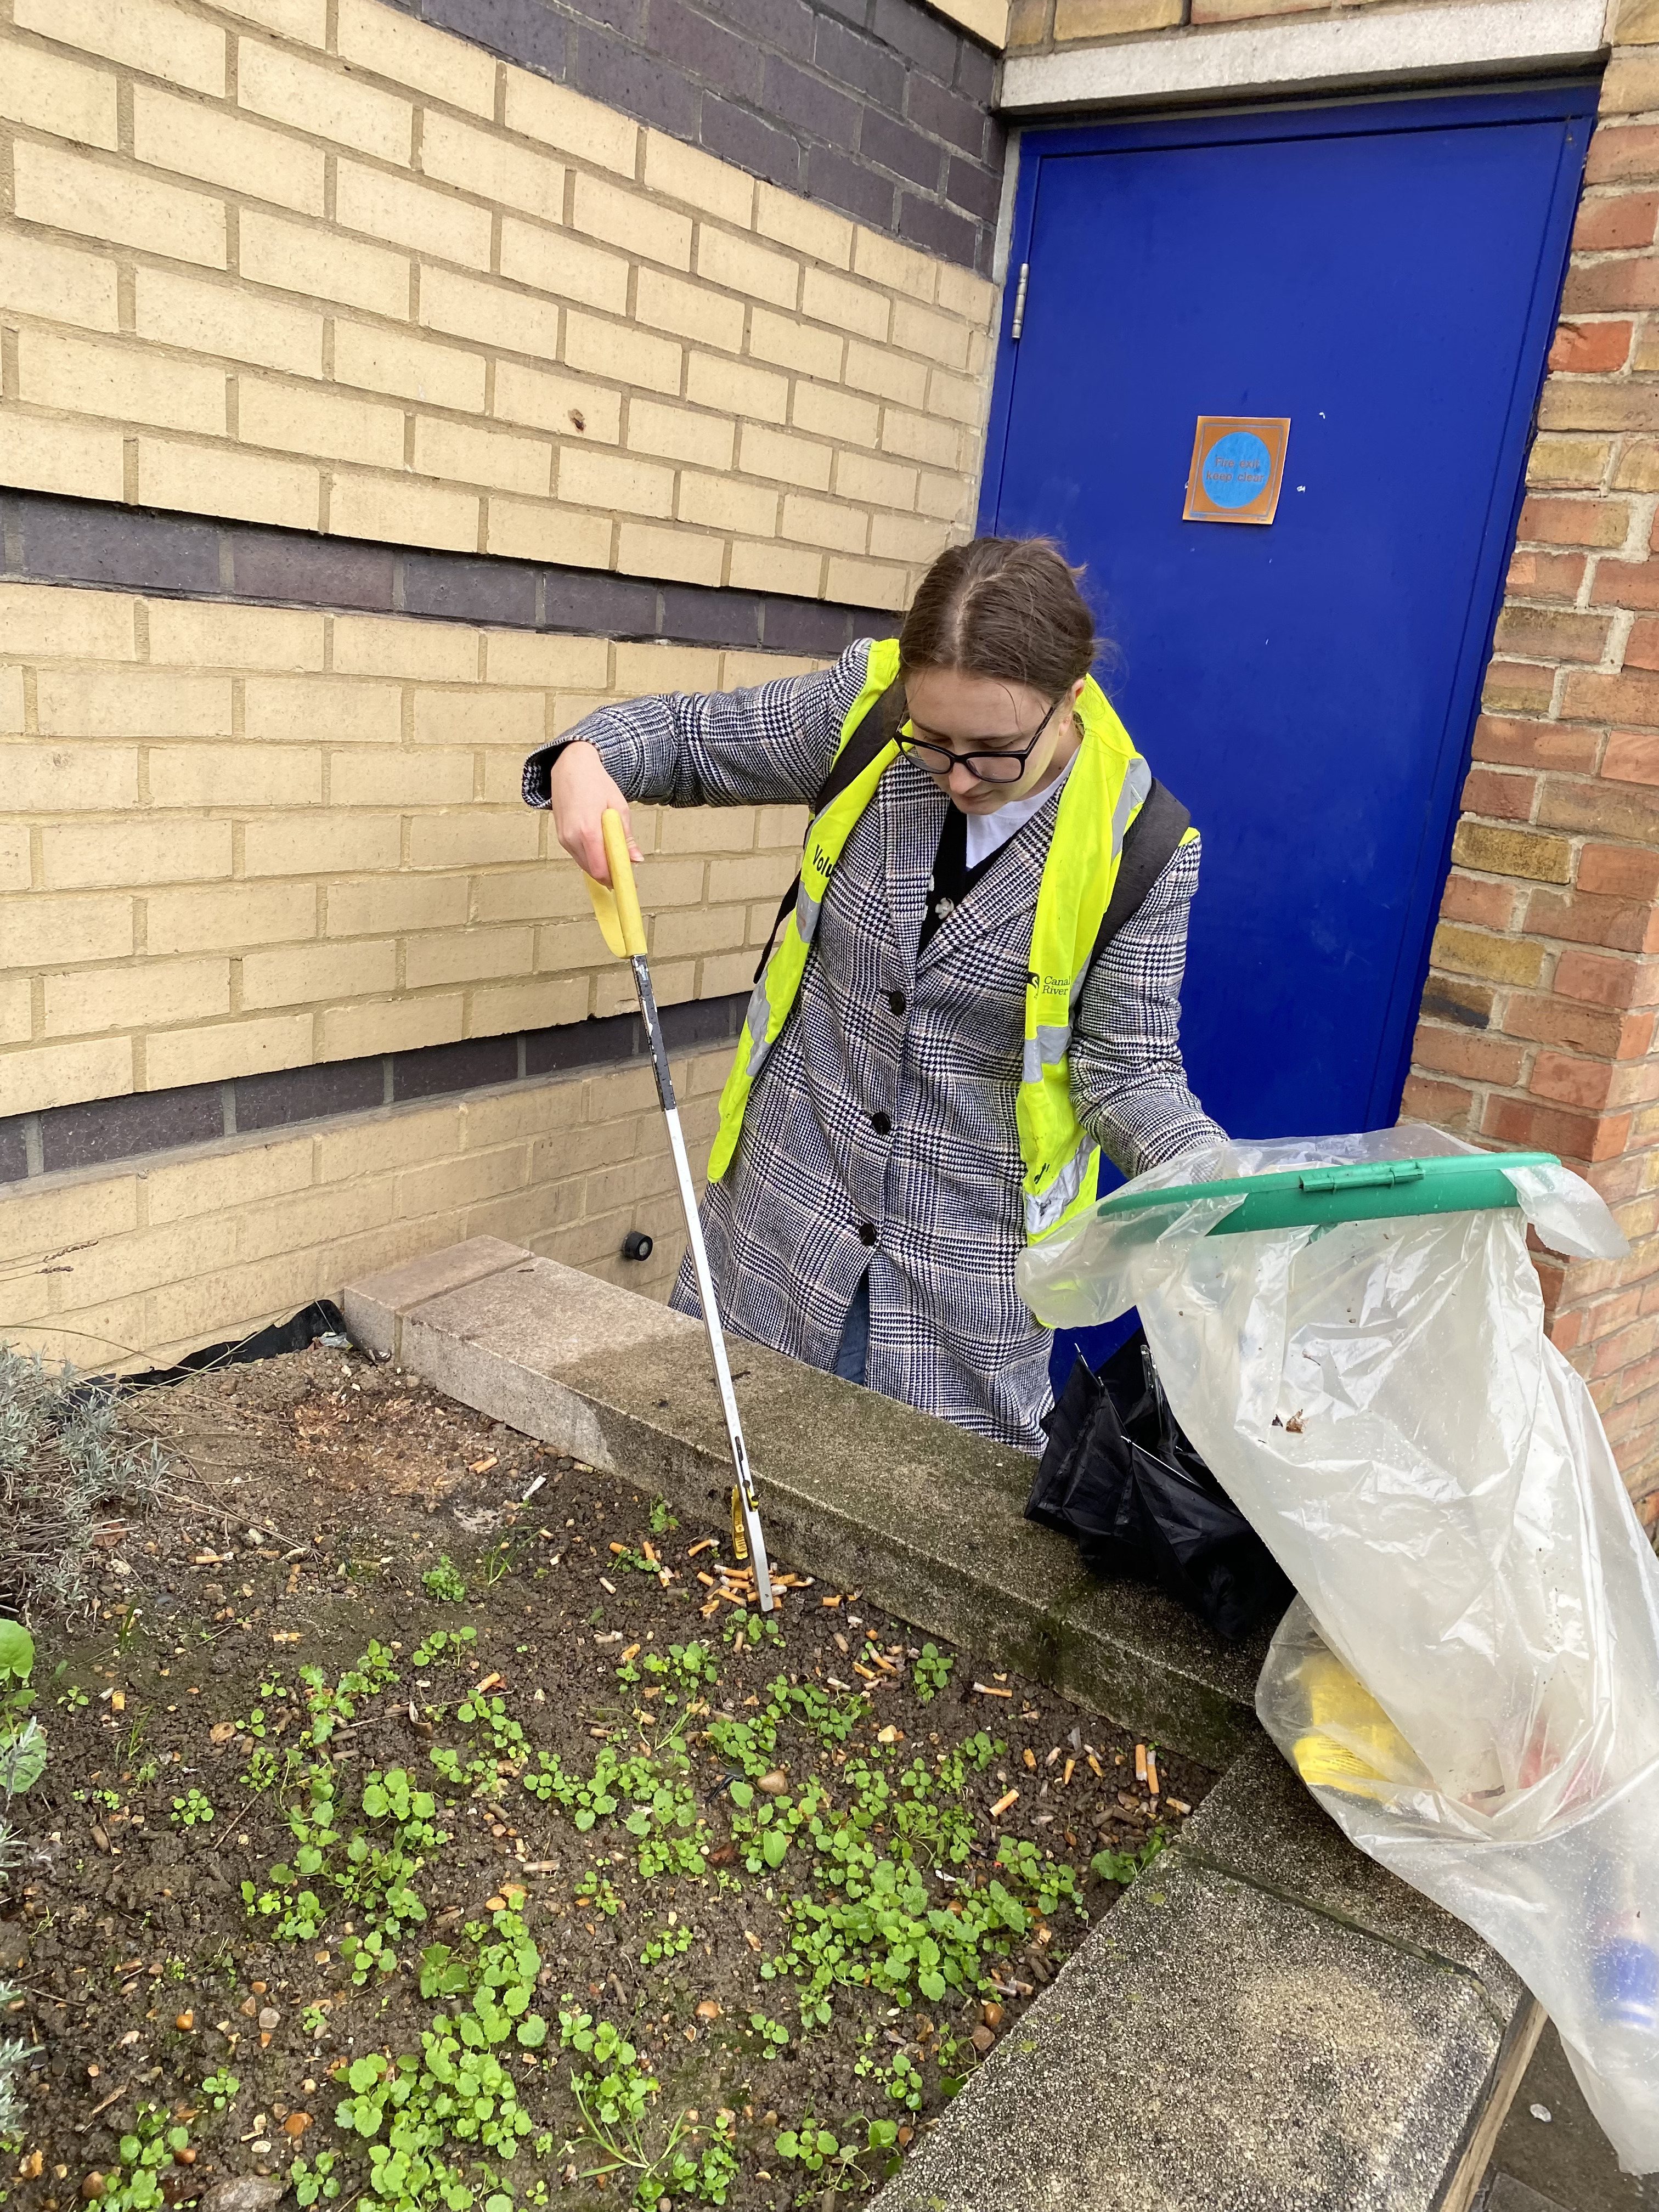 Student litter-picking outside the Mile End campus as part of Climate Action Week, picking up a large pile of cigarettes from a planter box.